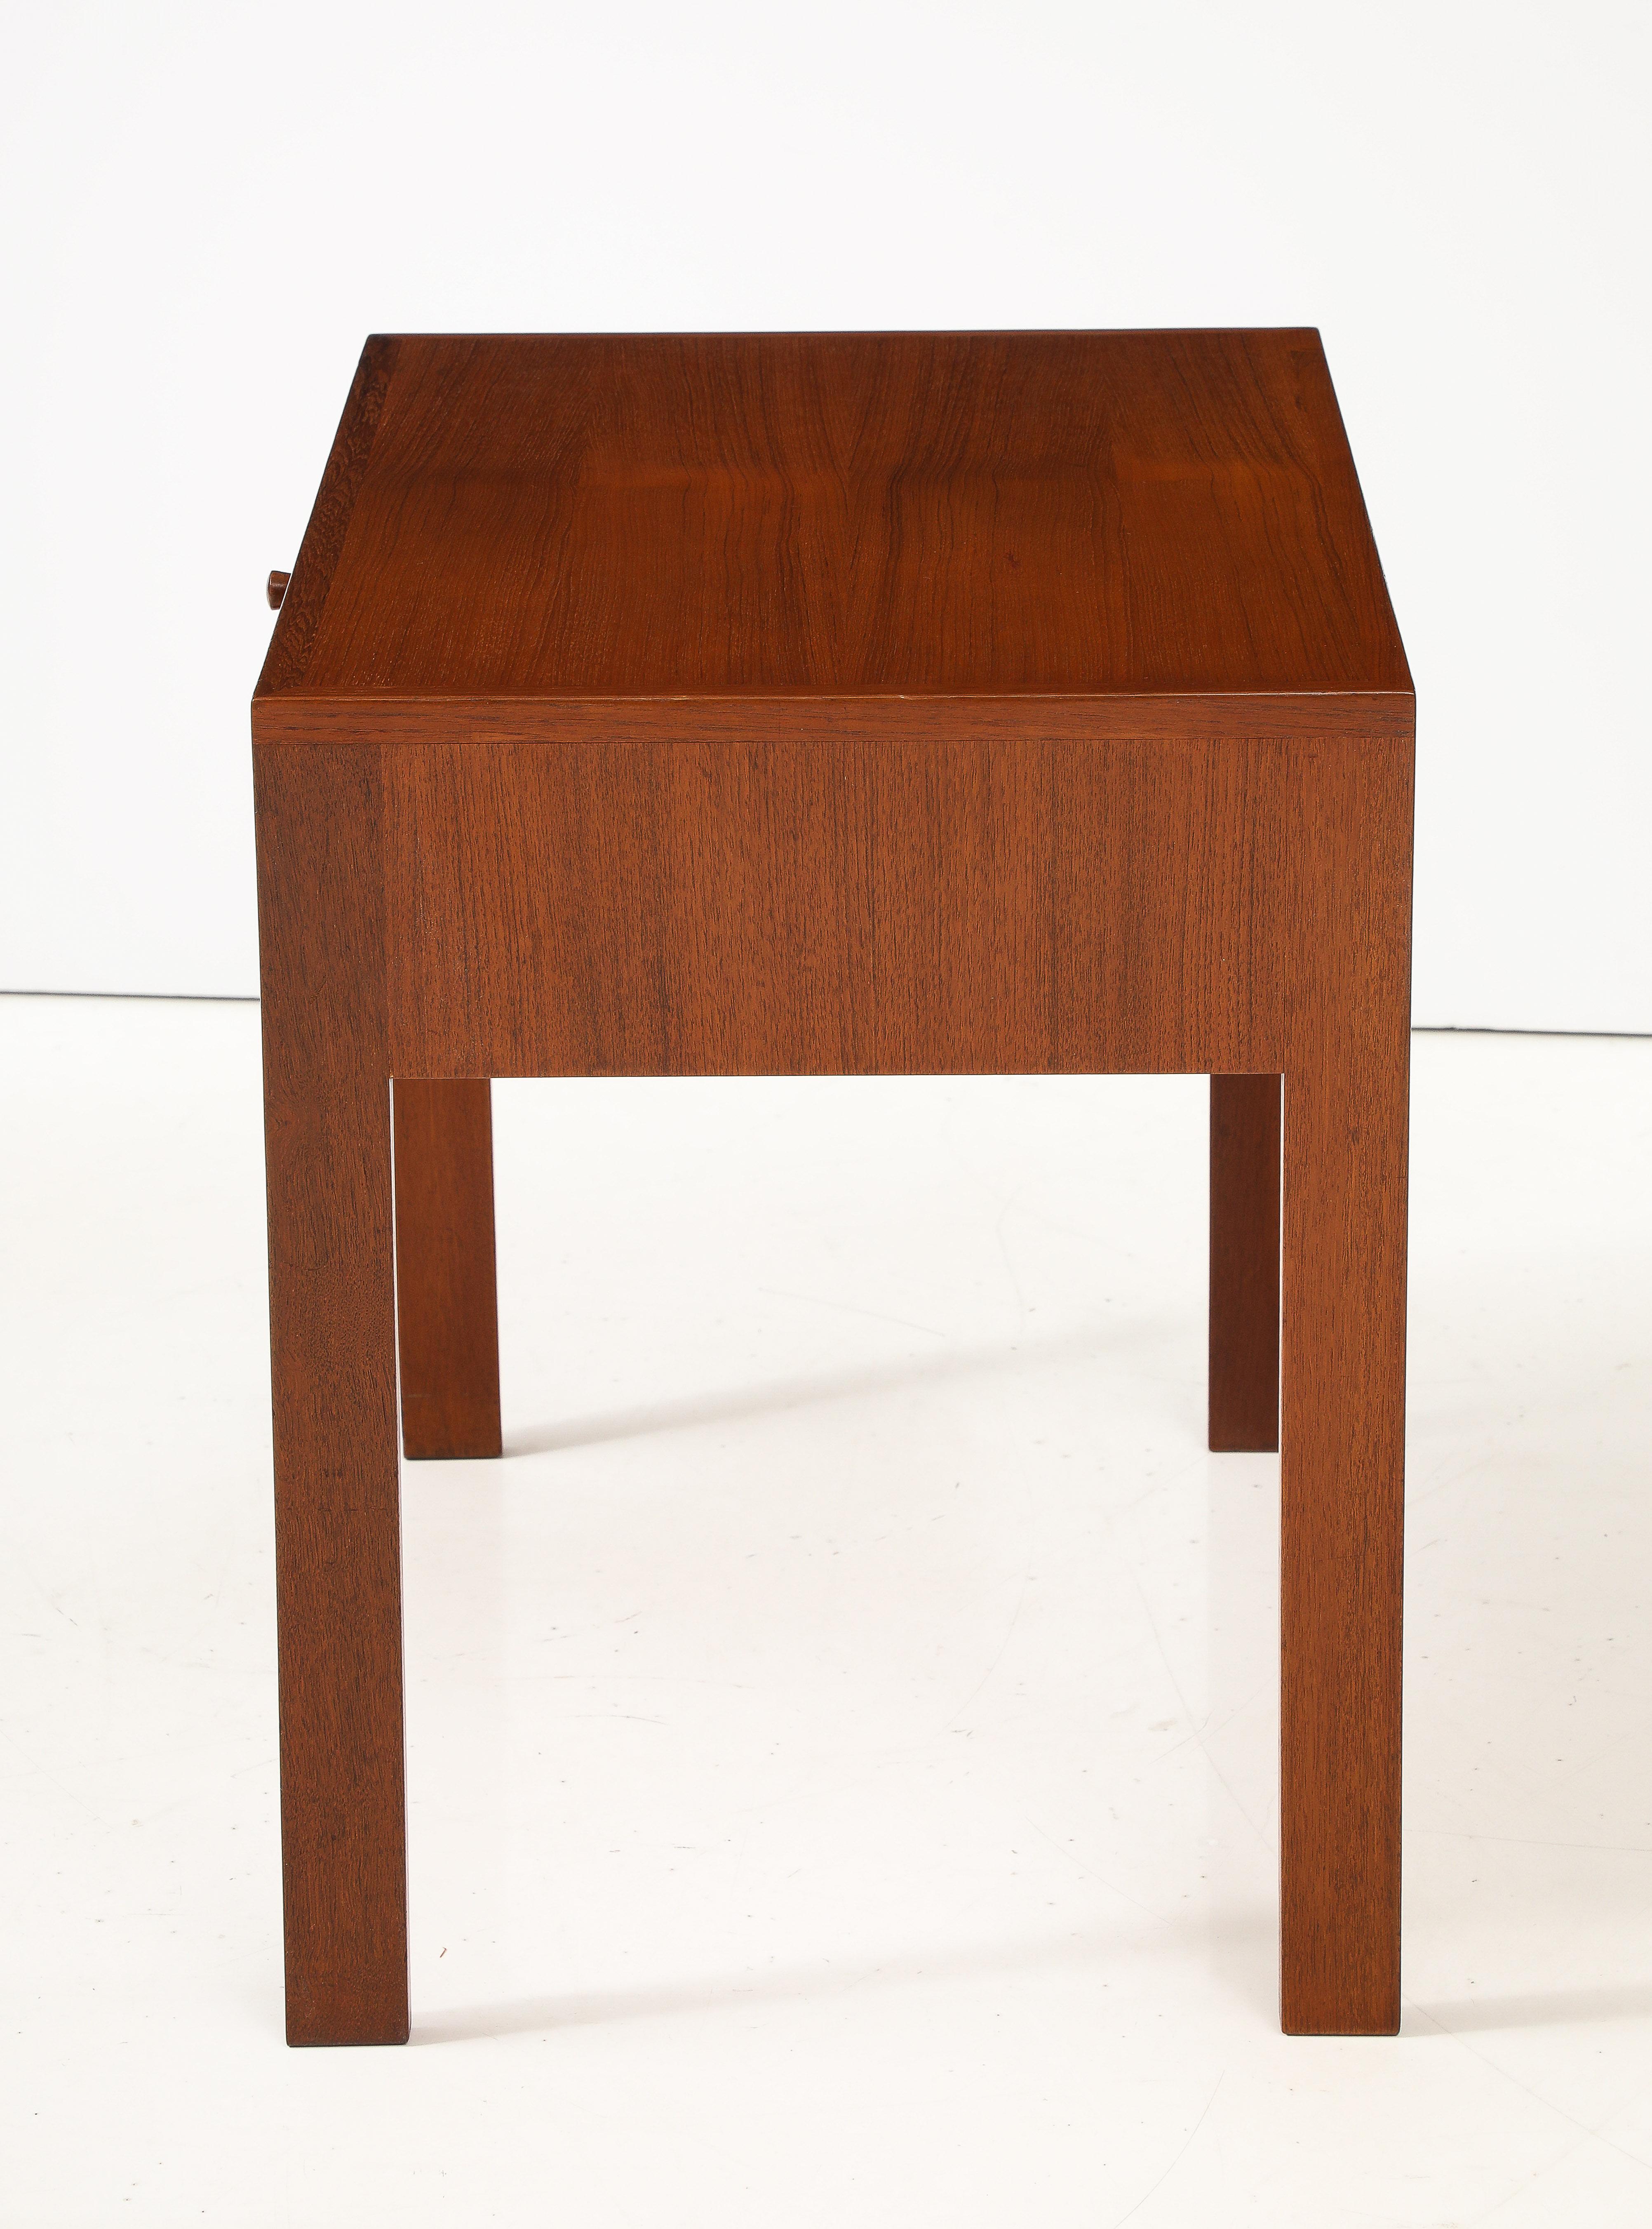 Illum Wikkelso Teak Folding Tables In Good Condition For Sale In New York, NY